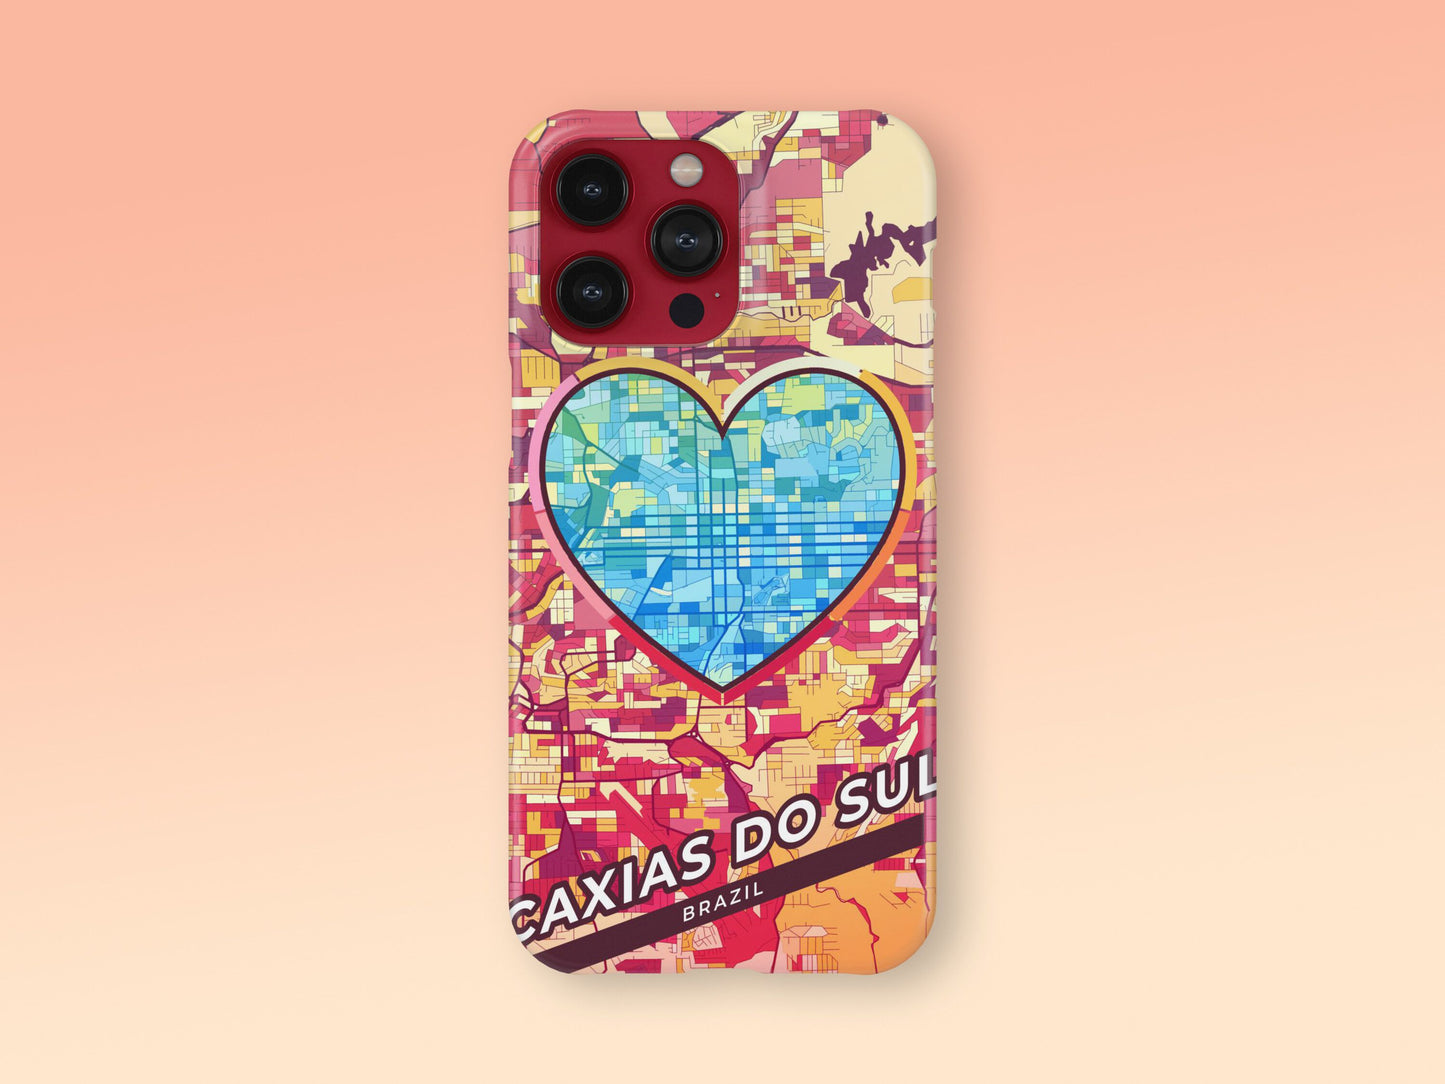 Caxias Do Sul Brazil slim phone case with colorful icon. Birthday, wedding or housewarming gift. Couple match cases. 2